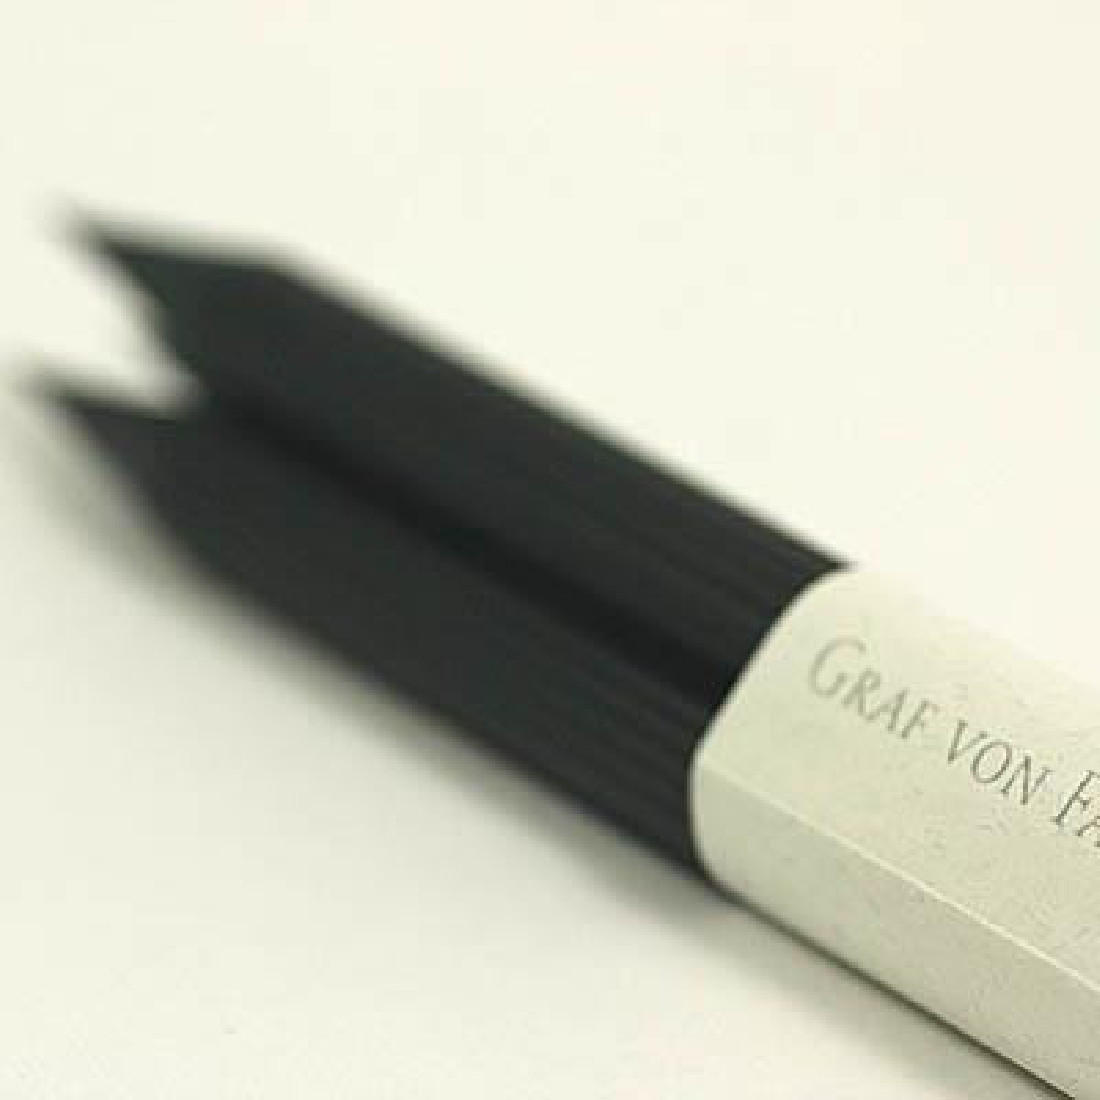 SET OF 3 BLACK PENCILS WITH DIPPED END 118638 GRAF VON FABER CASTELL